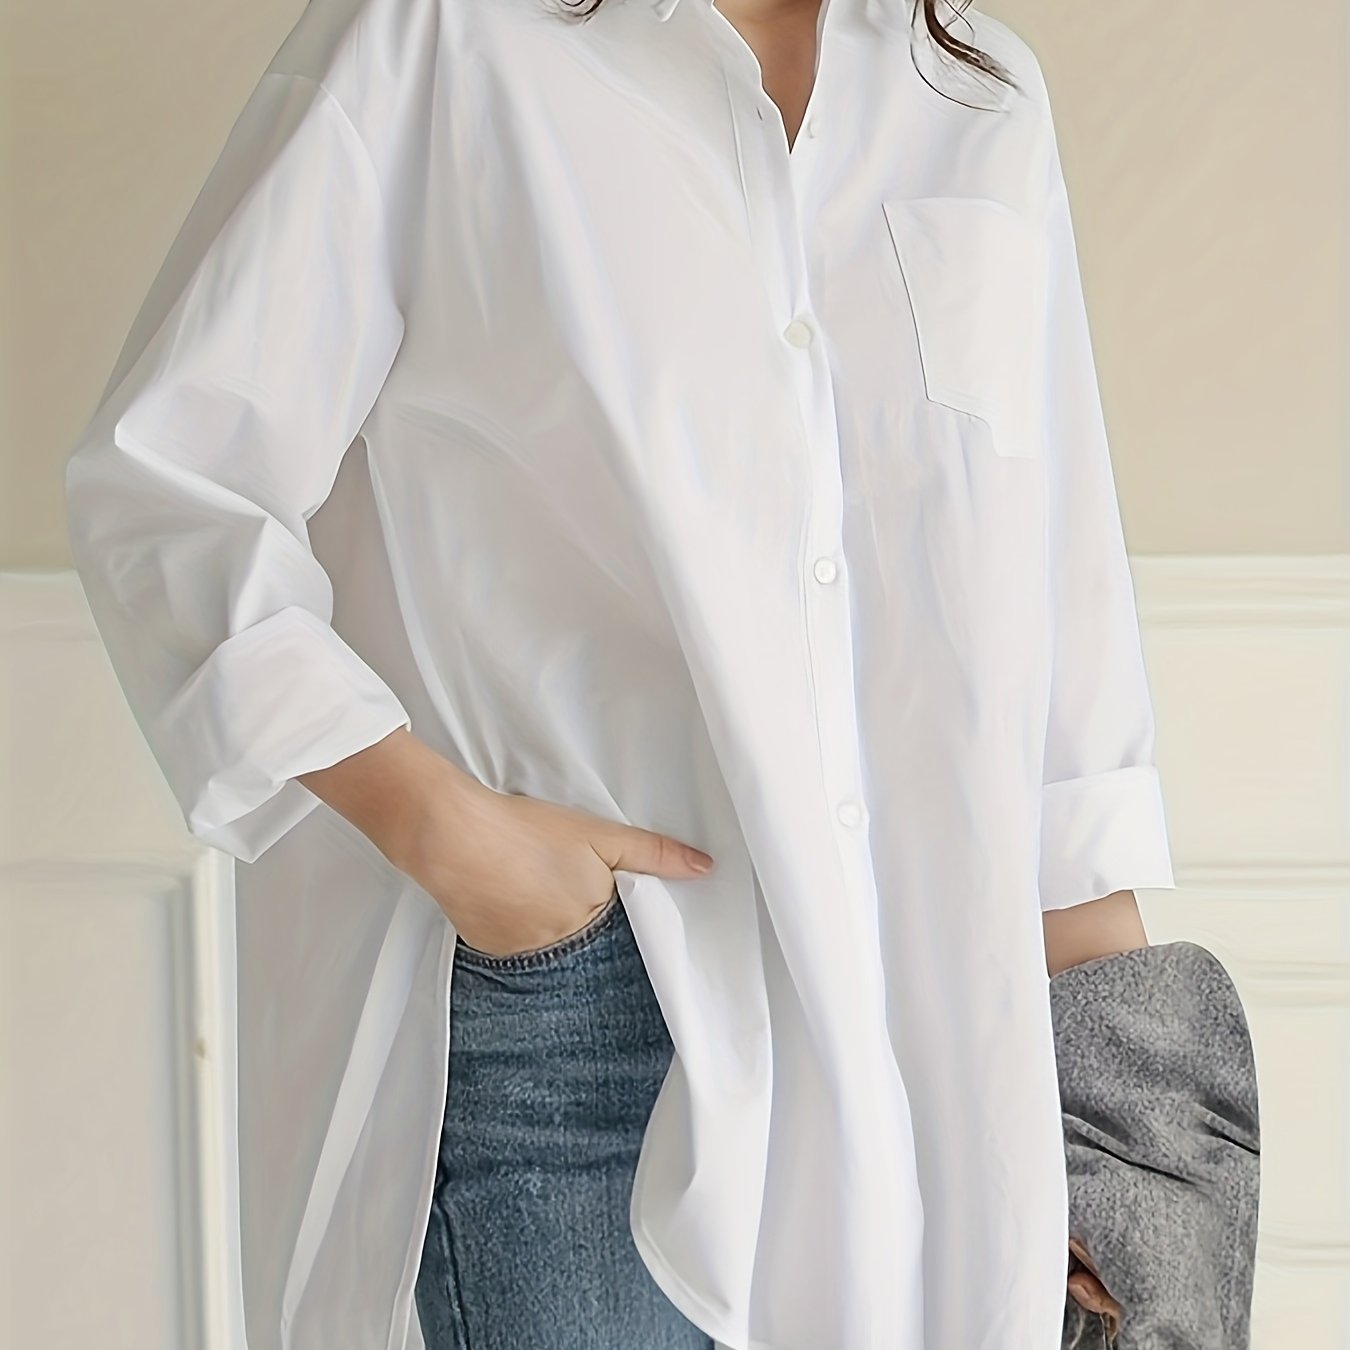 Antmvs Solid Button Front Curved Hem Shirt, Casual Long Sleeve Shirt For Spring & Fall, Women's Clothing